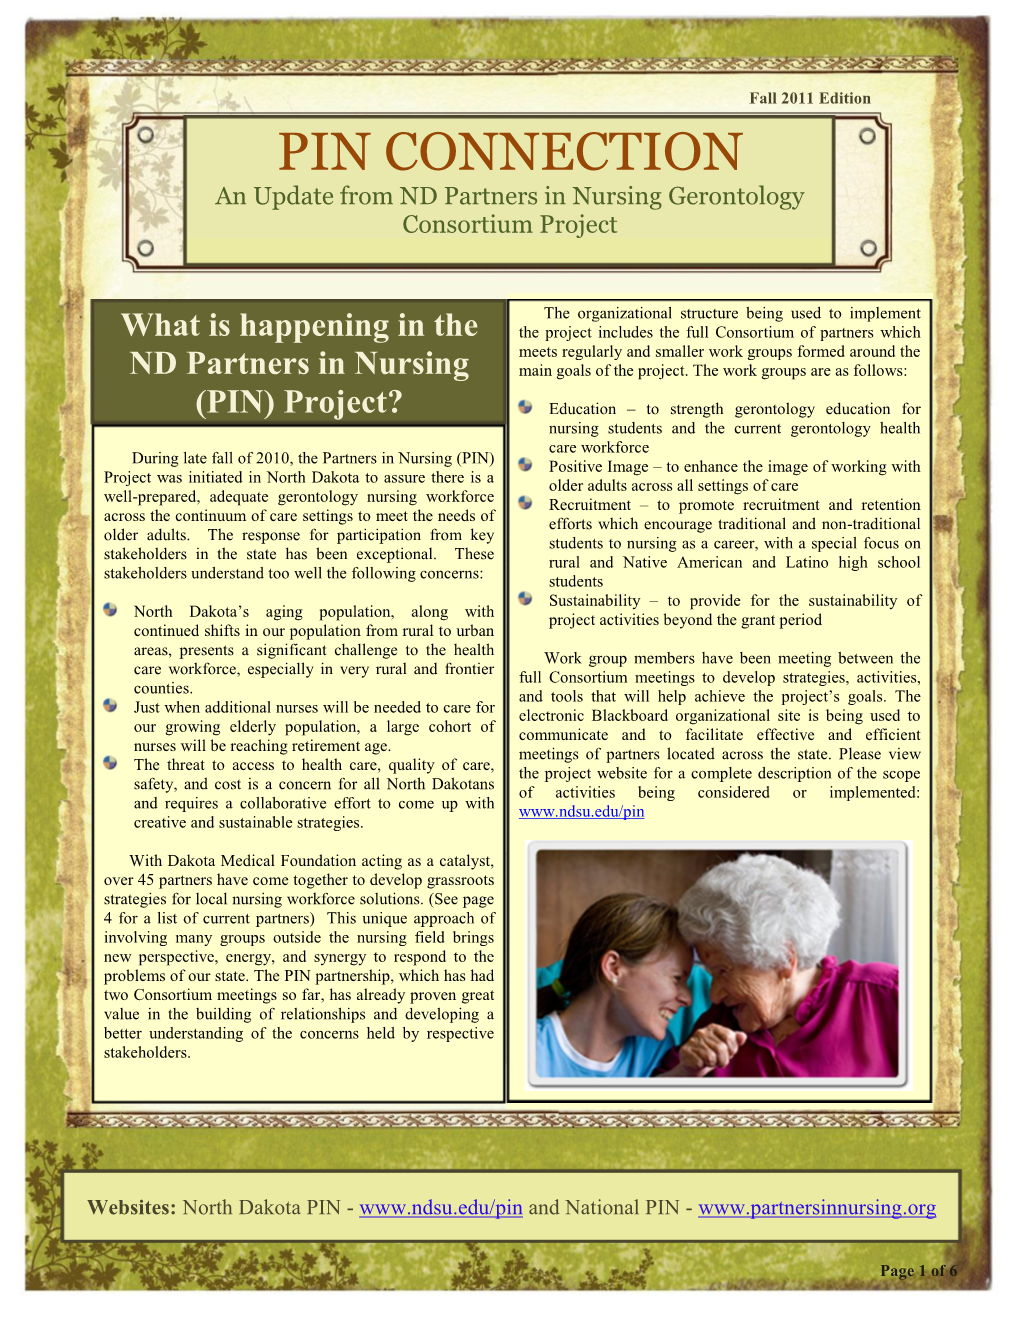 PIN CONNECTION an Update from ND Partners in Nursing Gerontology Consortium Project